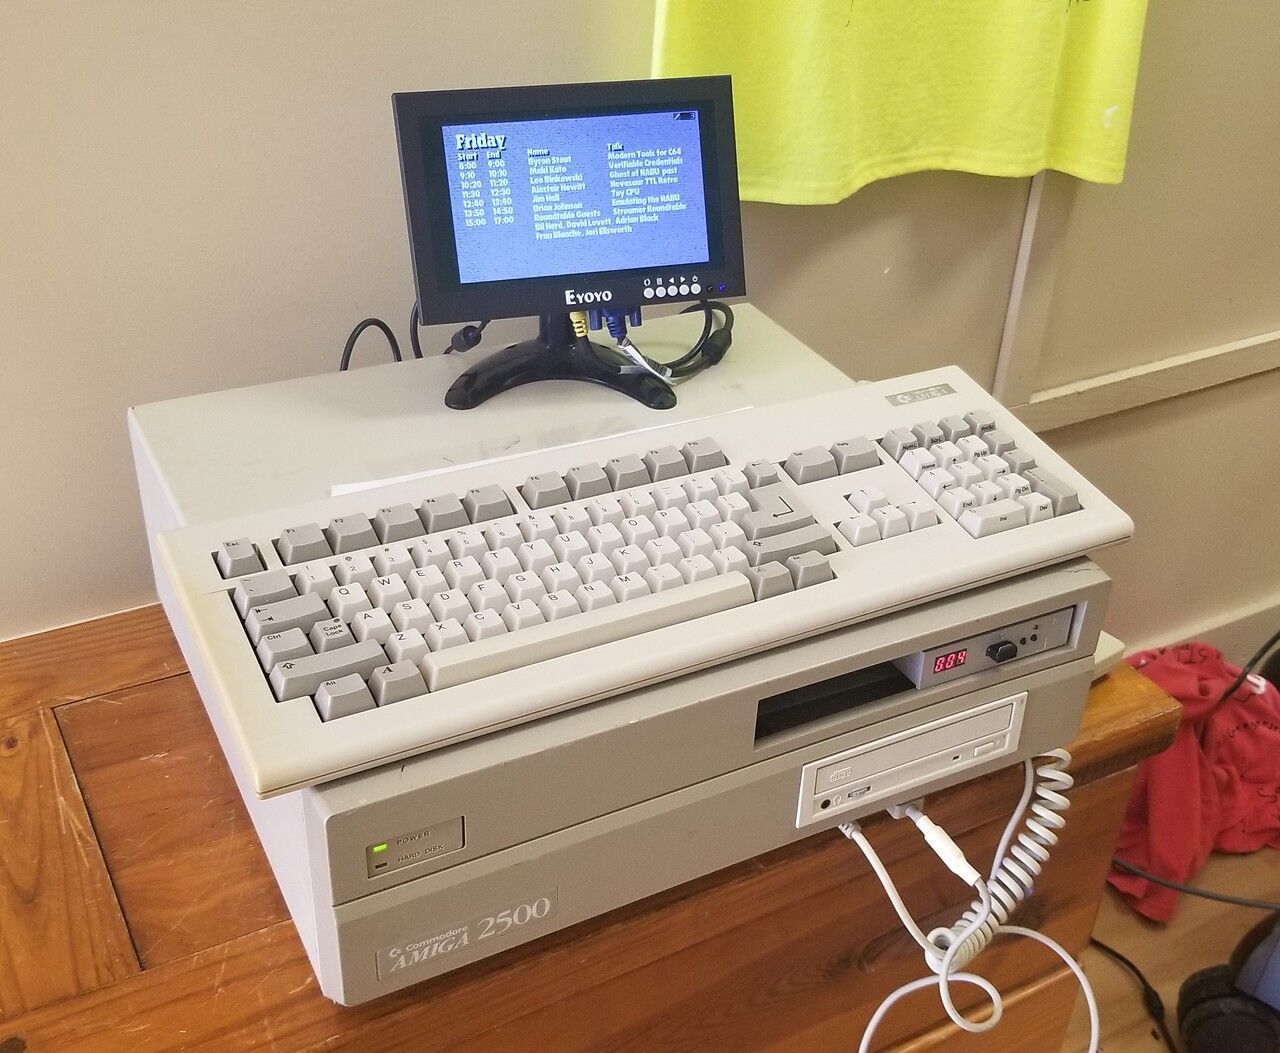 An Amiga 2500 with a small monitor hooked up. The Friday VCF East schedule is on the monitor.